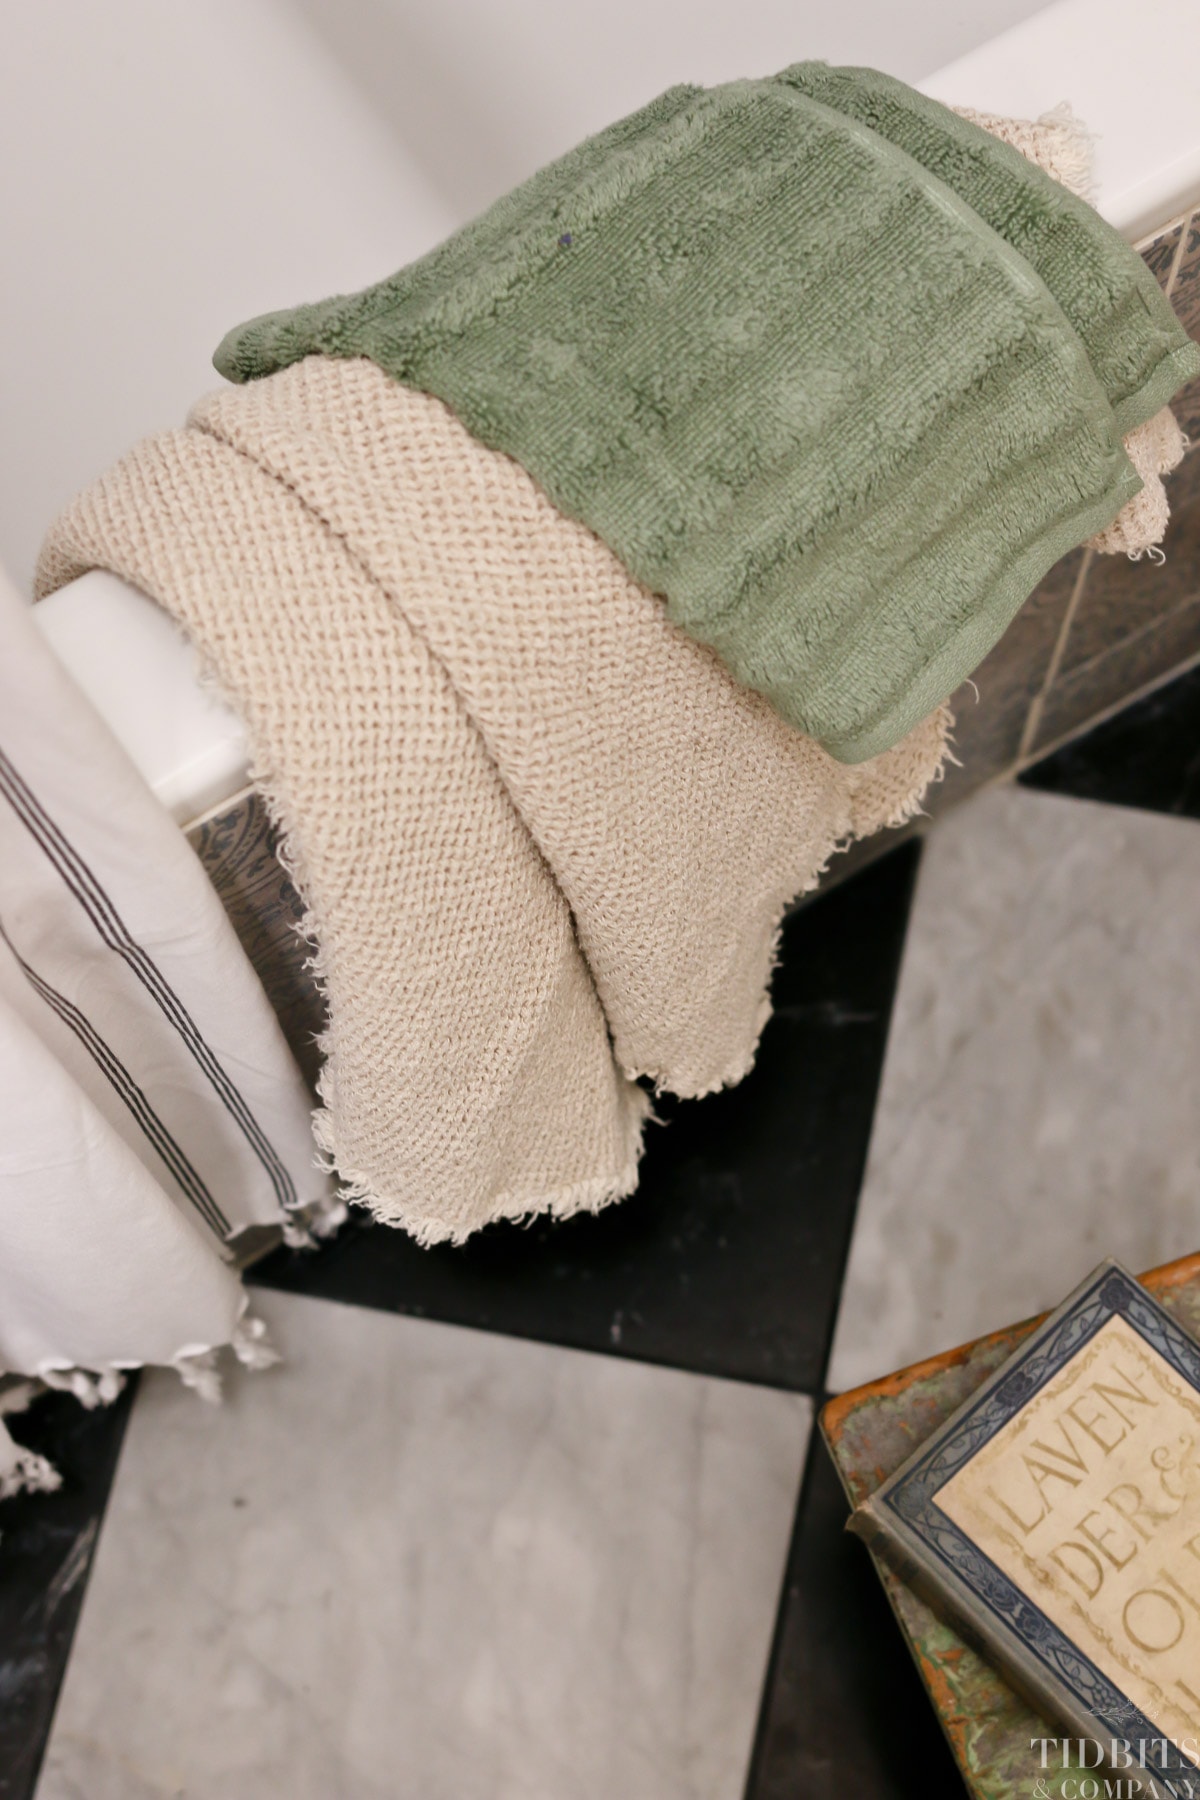 Towels lay over the side of a bathtub